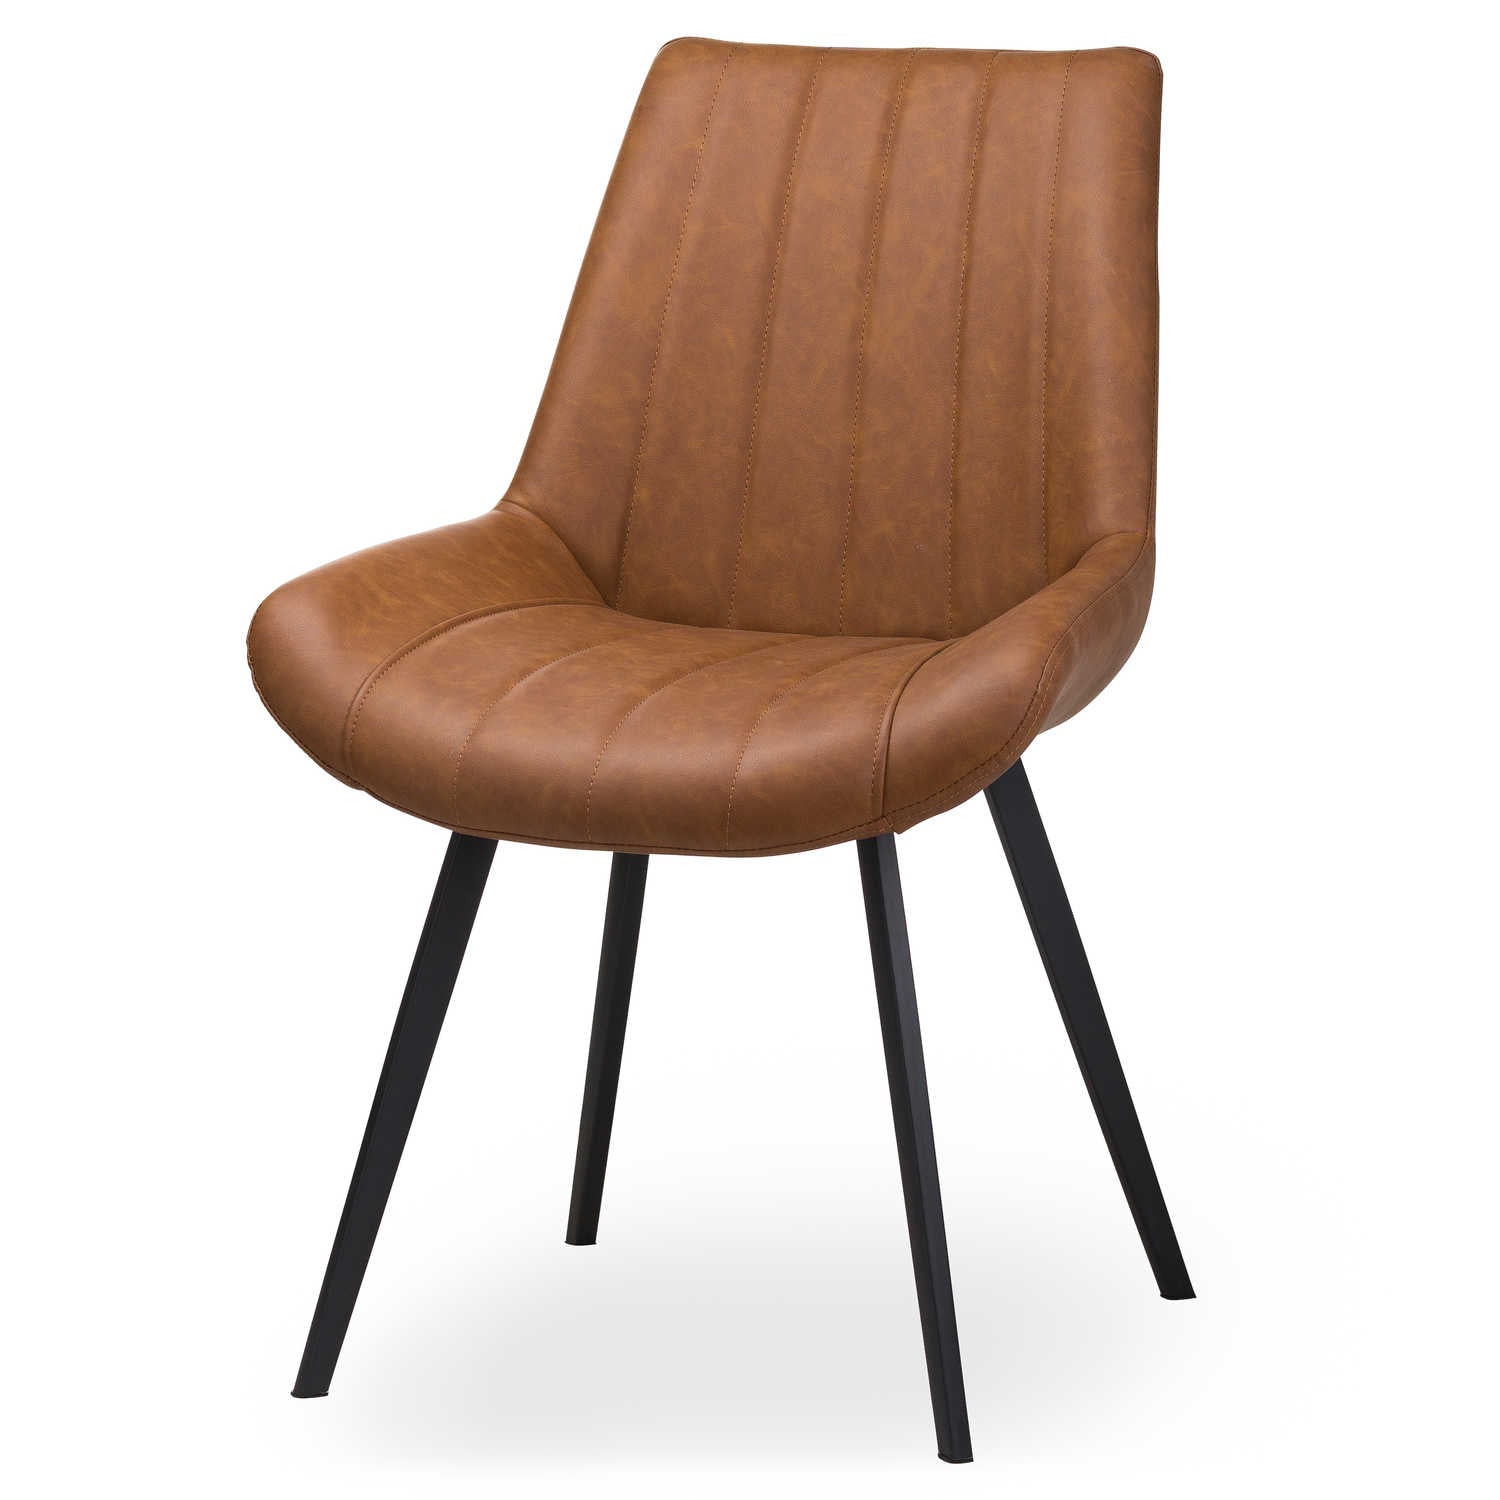 View Malmo Tan Dining Chair information